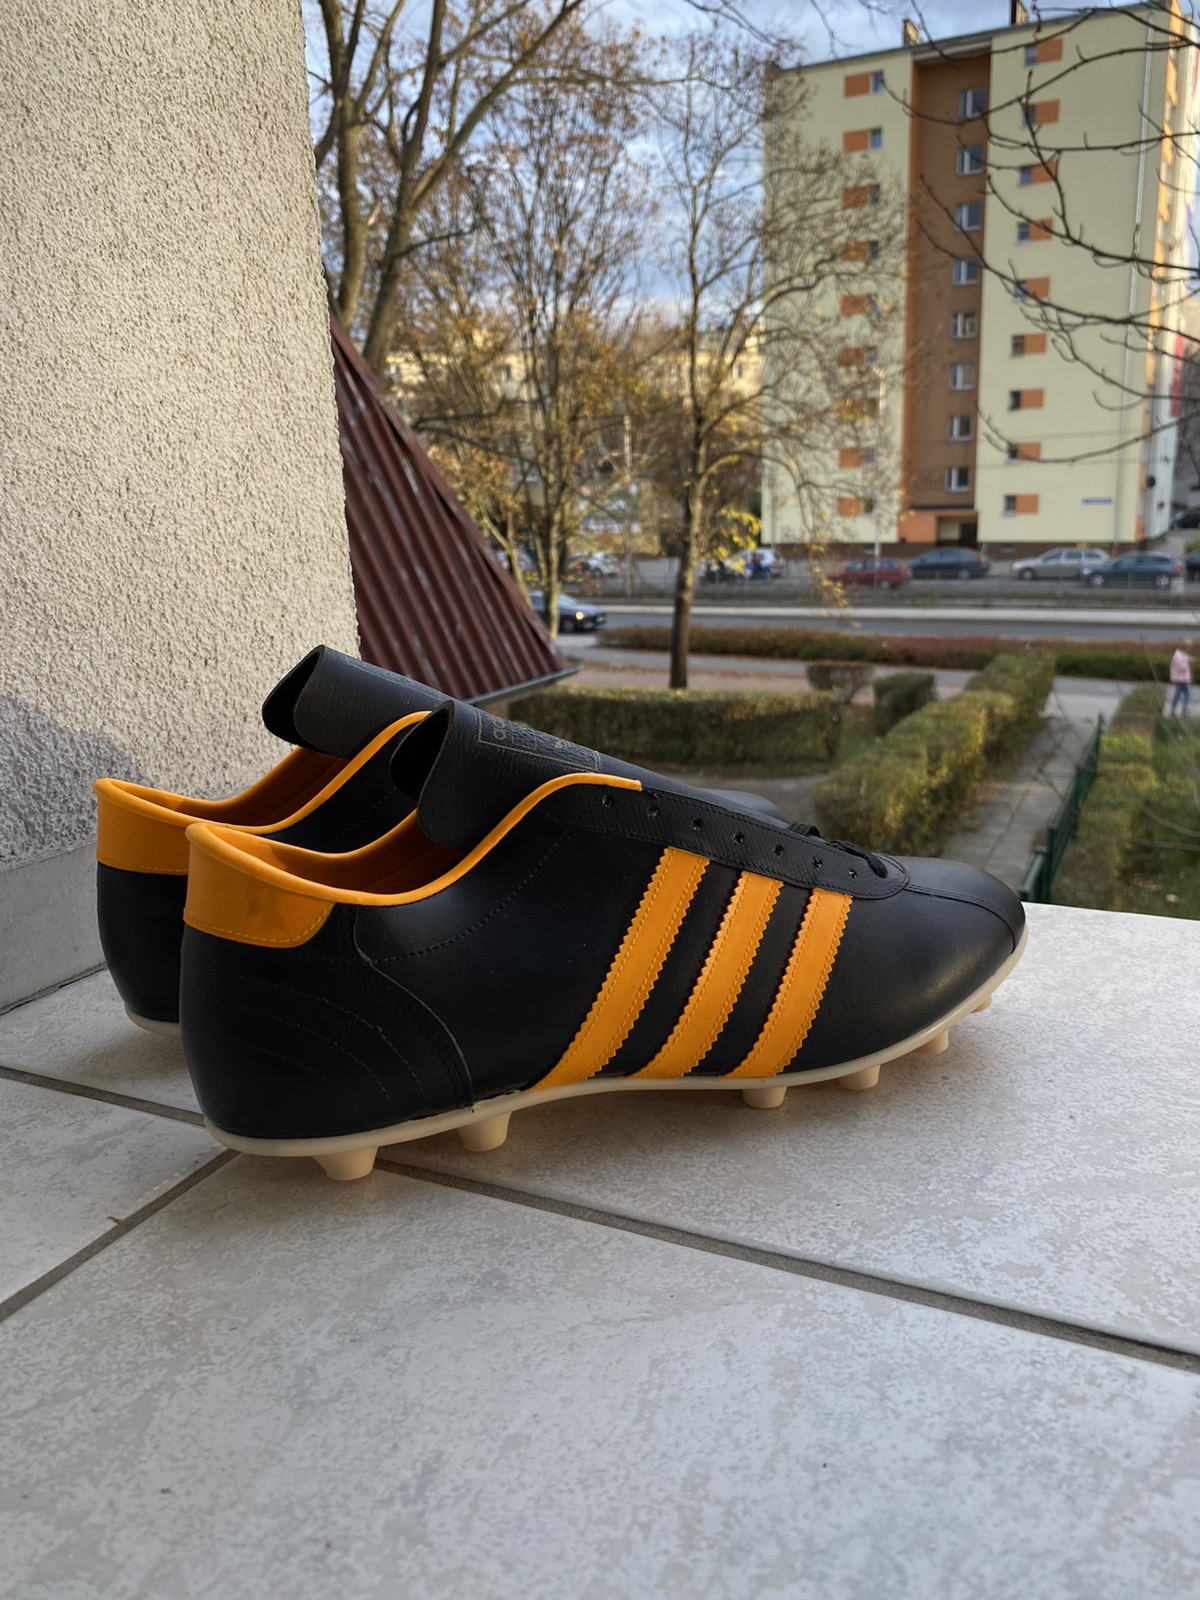 Adidas Kid made in France 70-80s football boots - 1